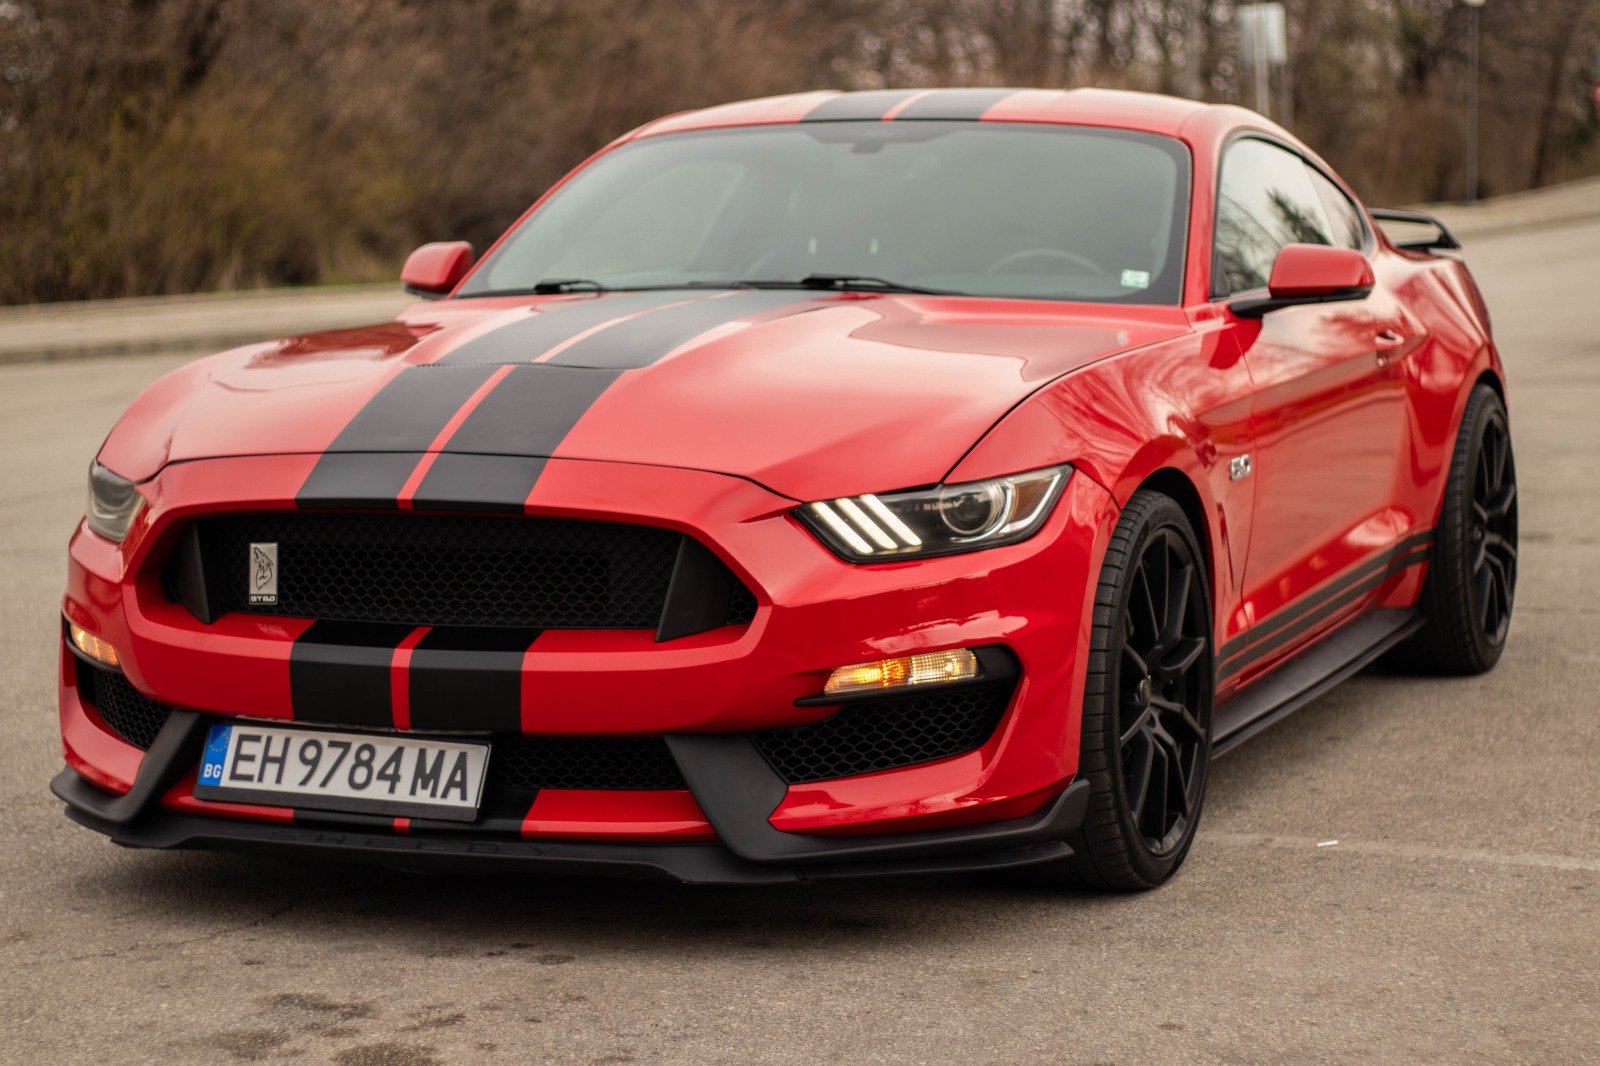 Ford Mustang 5.0 GT 350 pack Premium - изображение 1